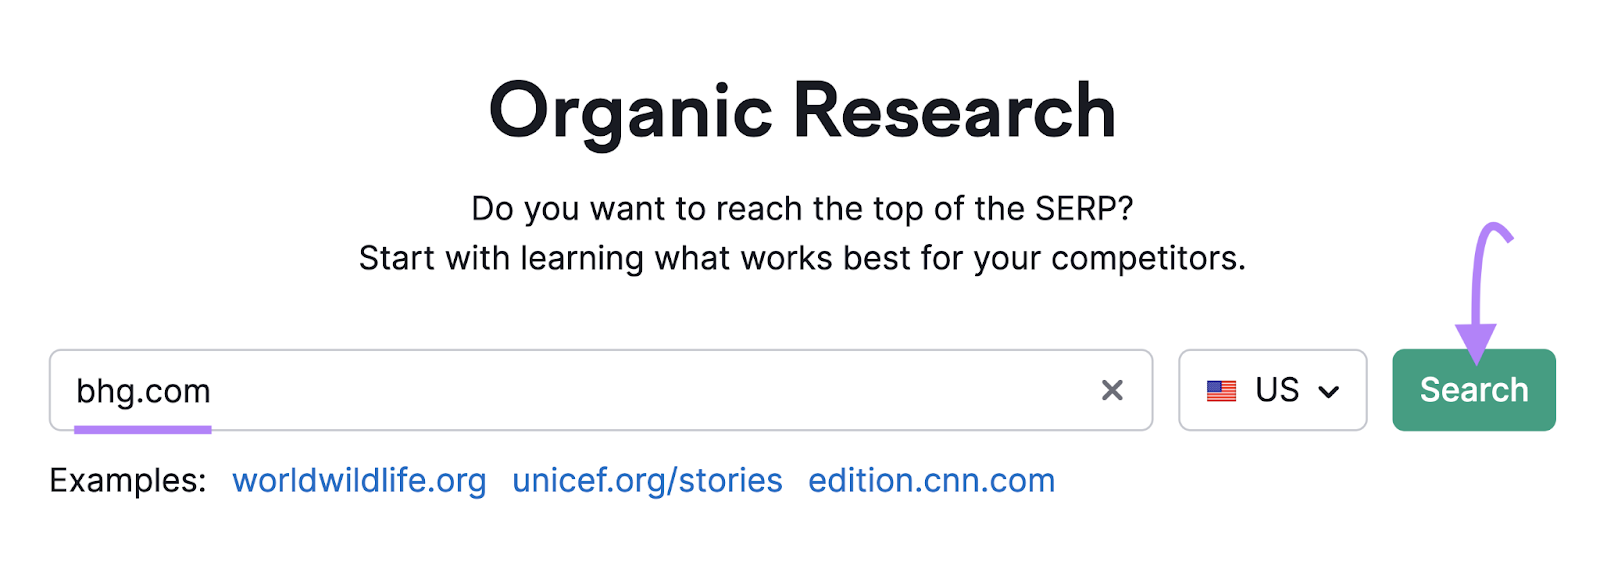 "bhg.com" entered into Organic Research search bar